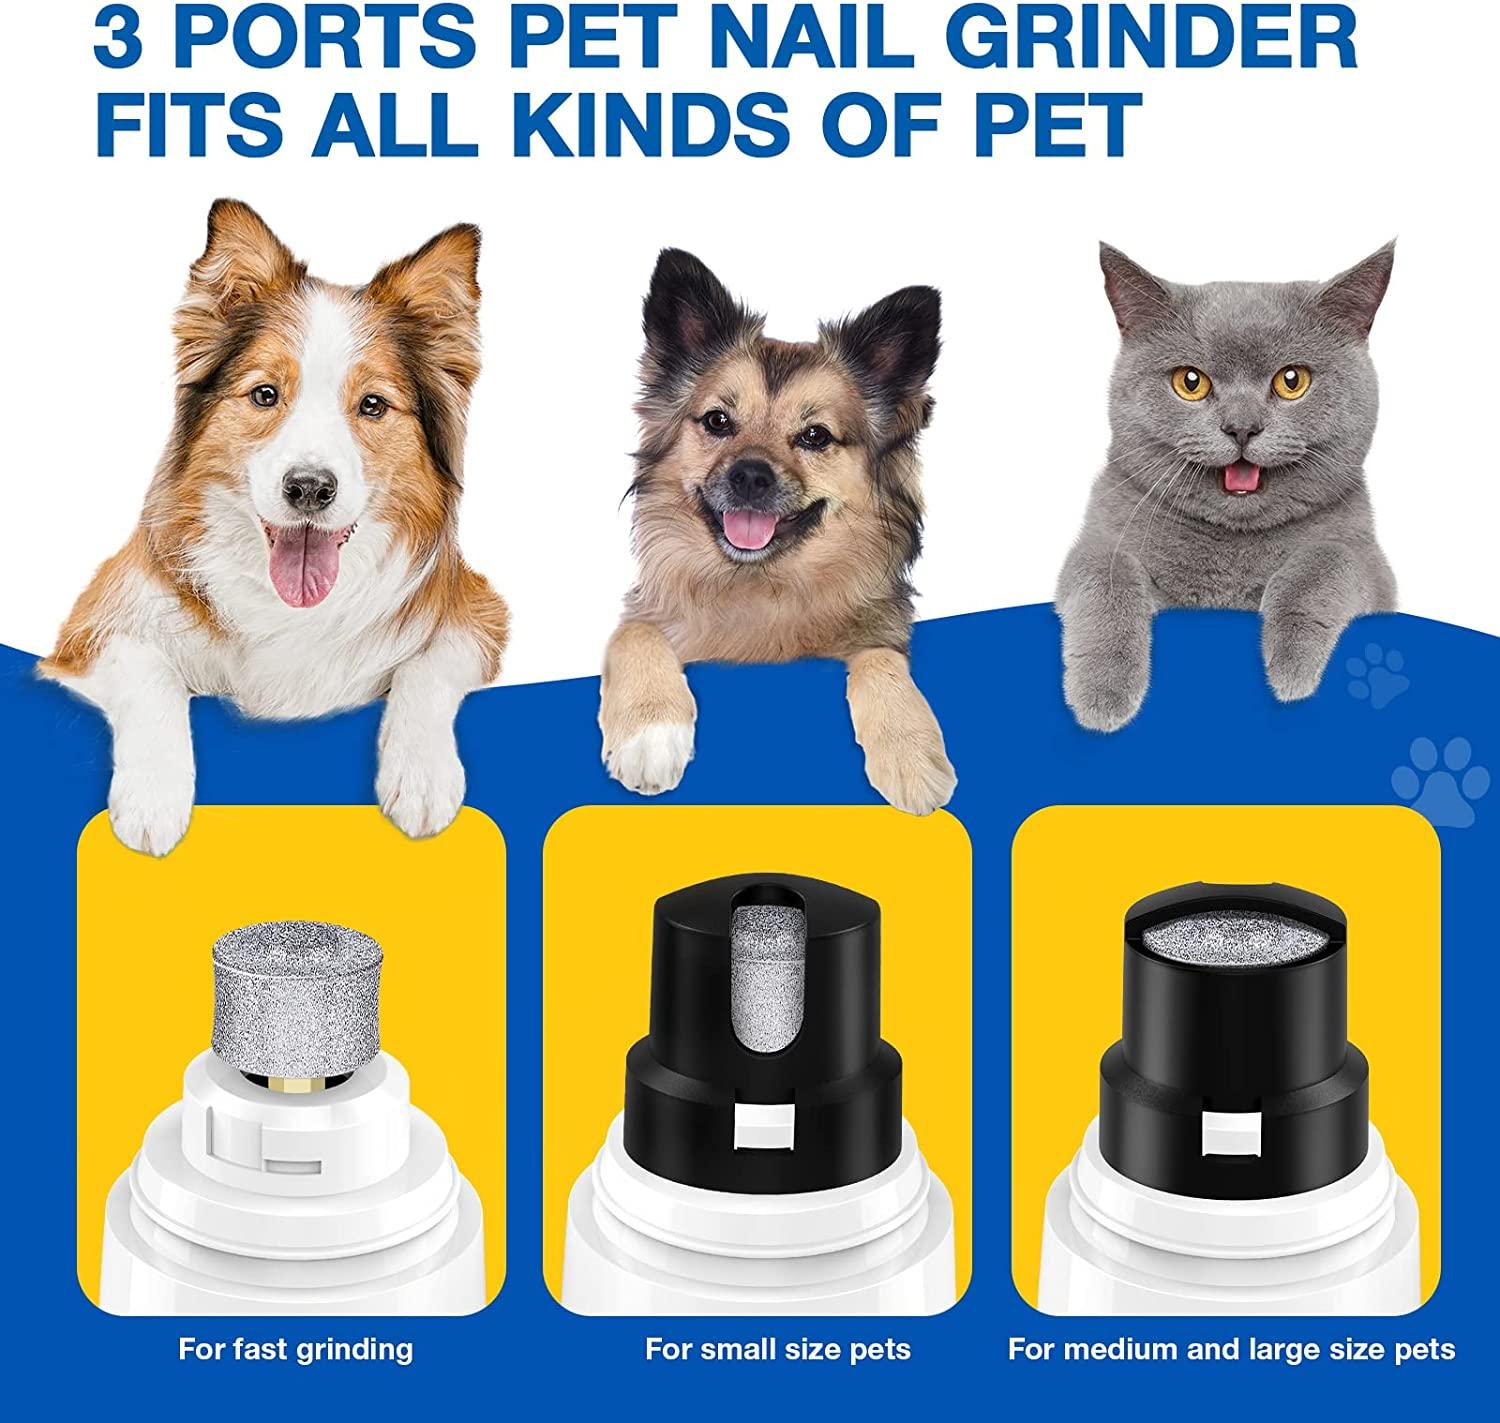 Your Guide to the Best Dog Nail Grinders + Safety Tips - Veterinarians.org